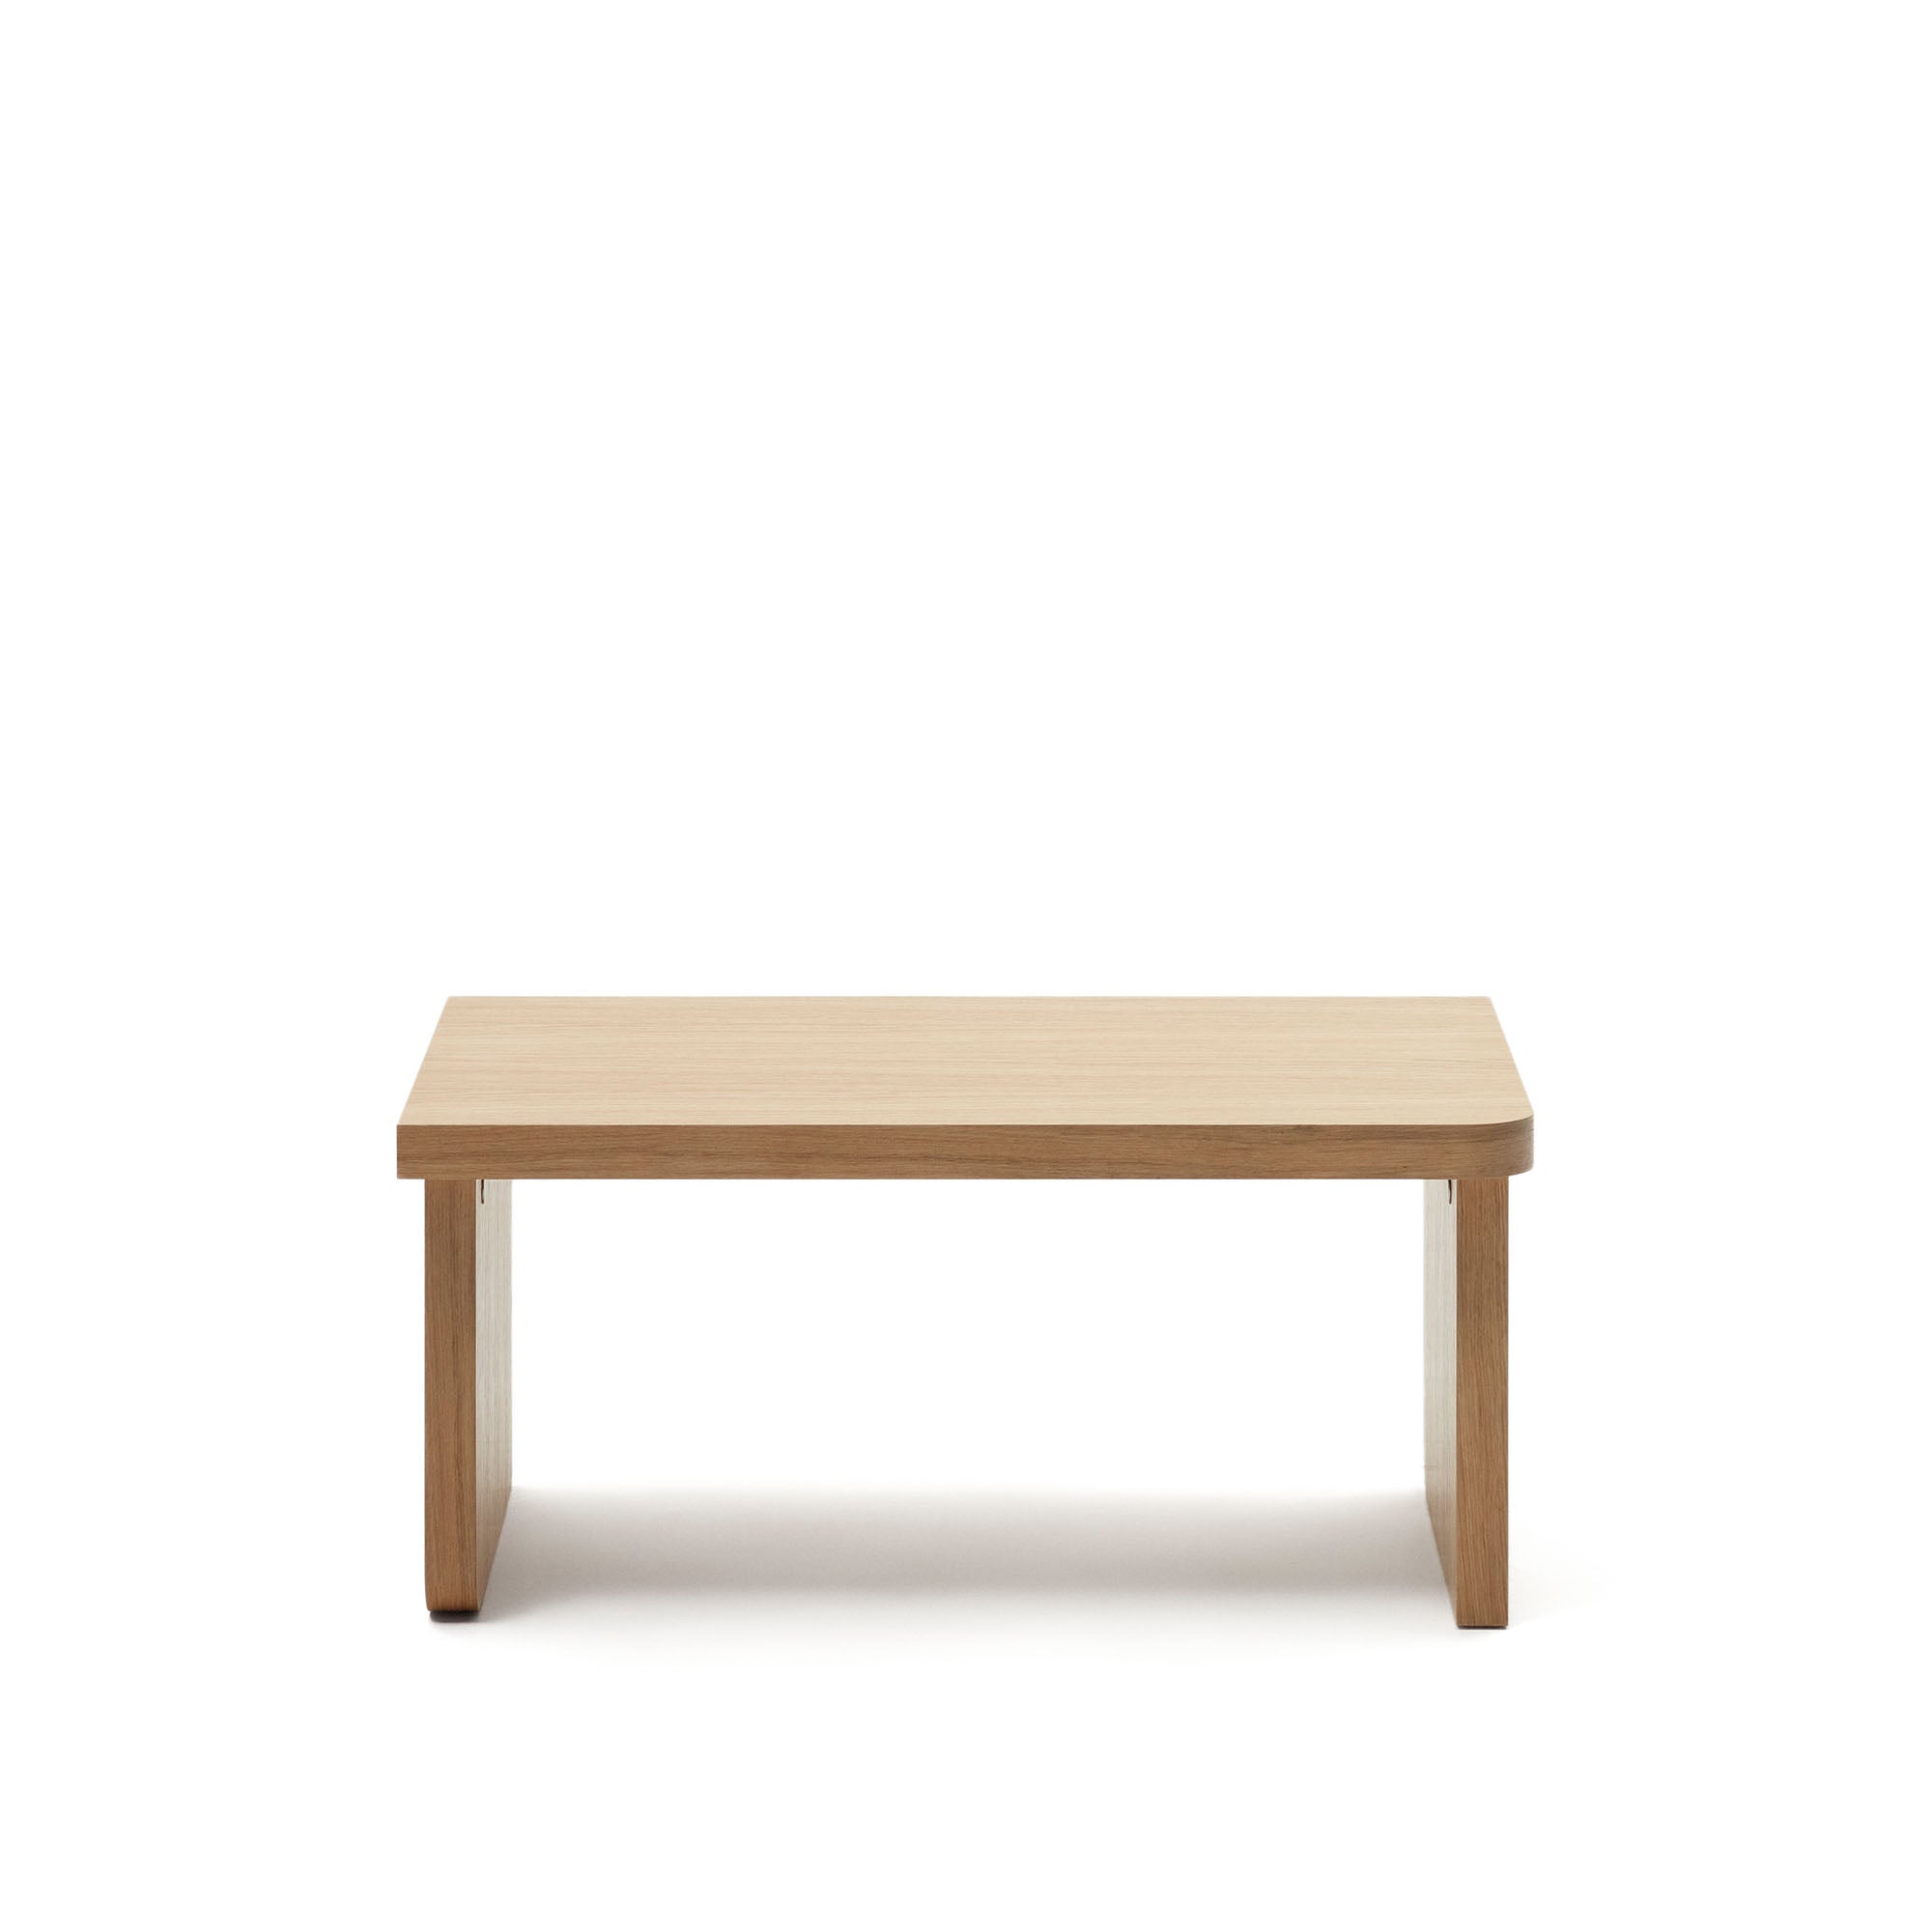 Oaq coffee table in oak wood veneer with natural finish, 82 x 60 cm